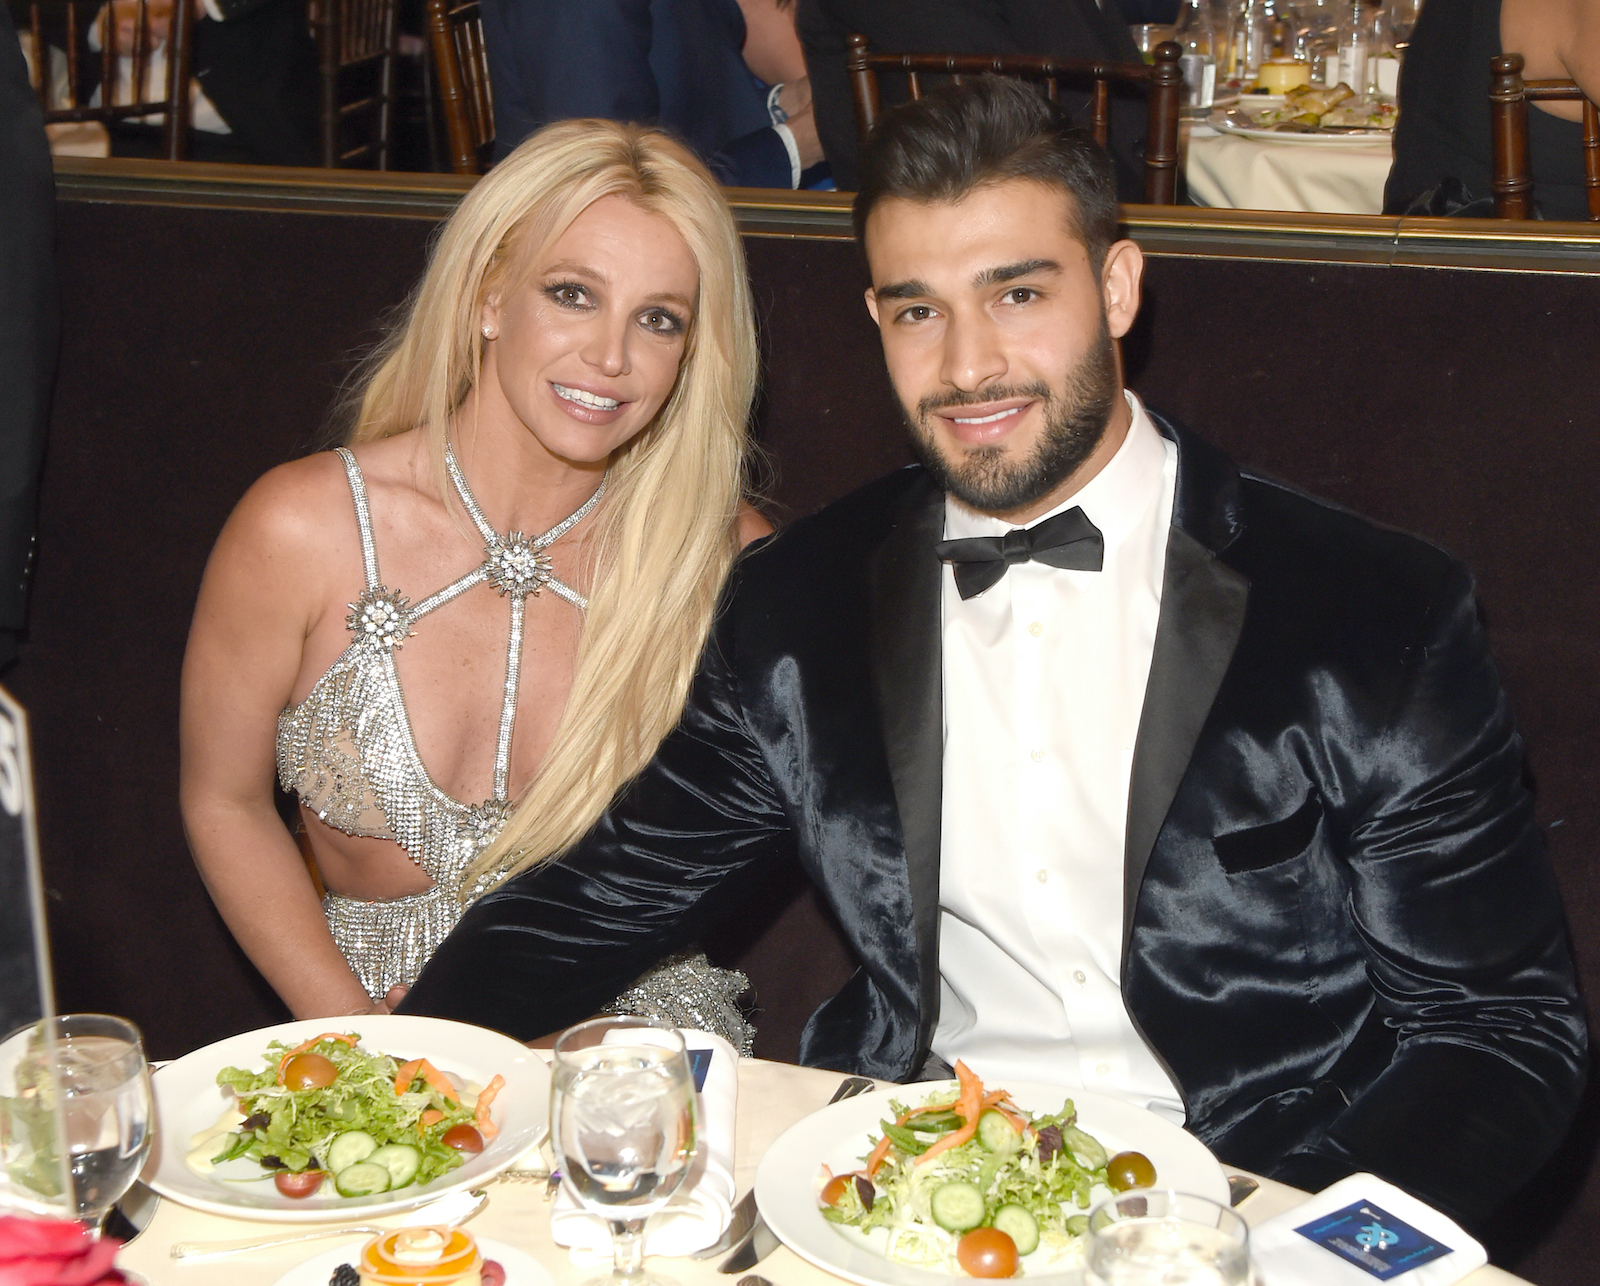 Britney Spears and Sam Asghari attend the 29th Annual GLAAD Media Awards in 2018